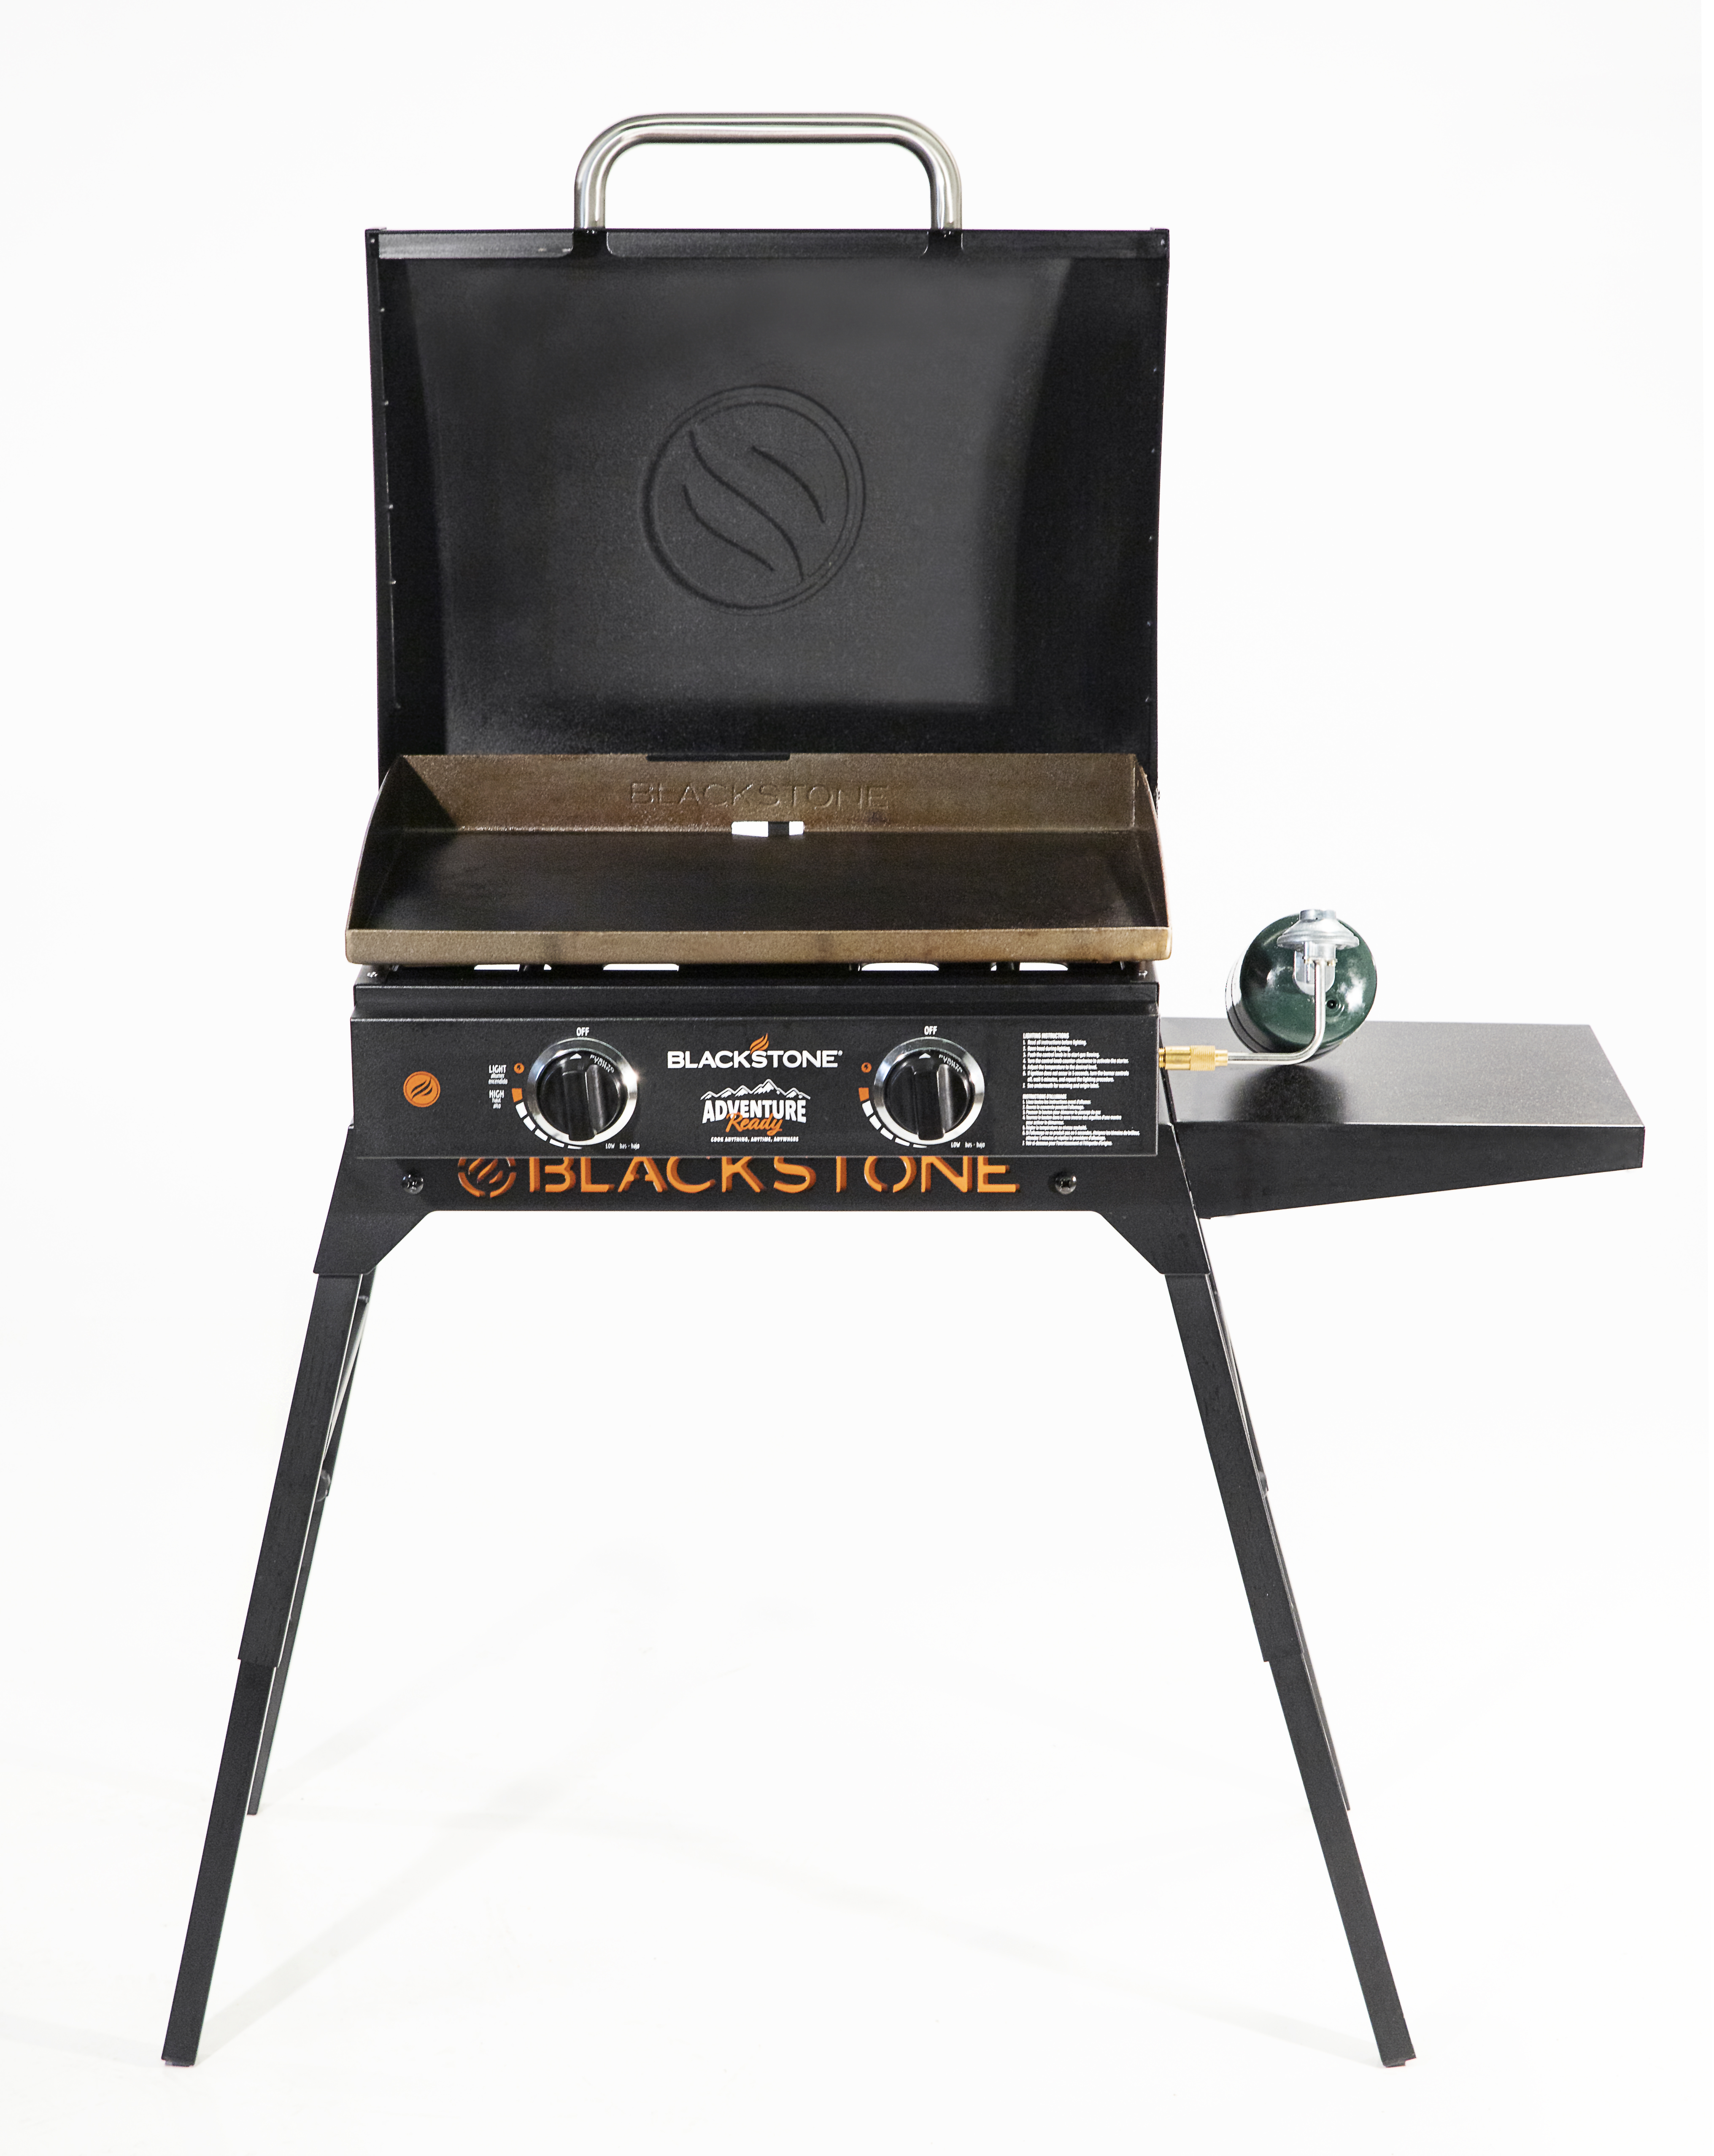 Blackstone Adventure Ready 22" Griddle with Hood, Legs, Adapter Hose - image 9 of 14